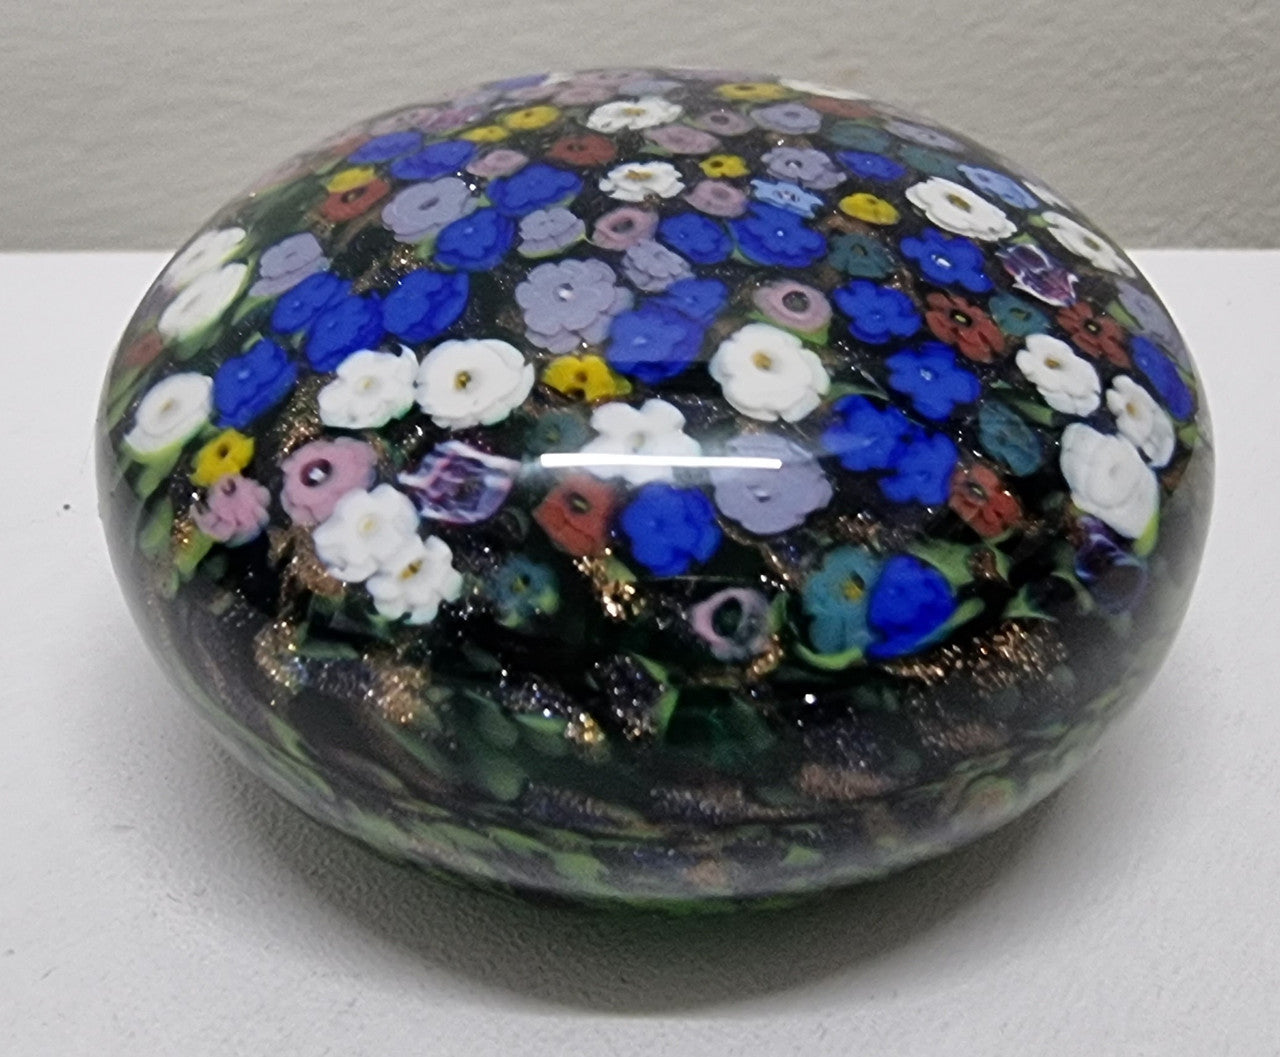 Vintage Murano art glass Millefiori Aventurine paperweight with supurb floral design. In great original condition. Please view photos as they help form part of the description.